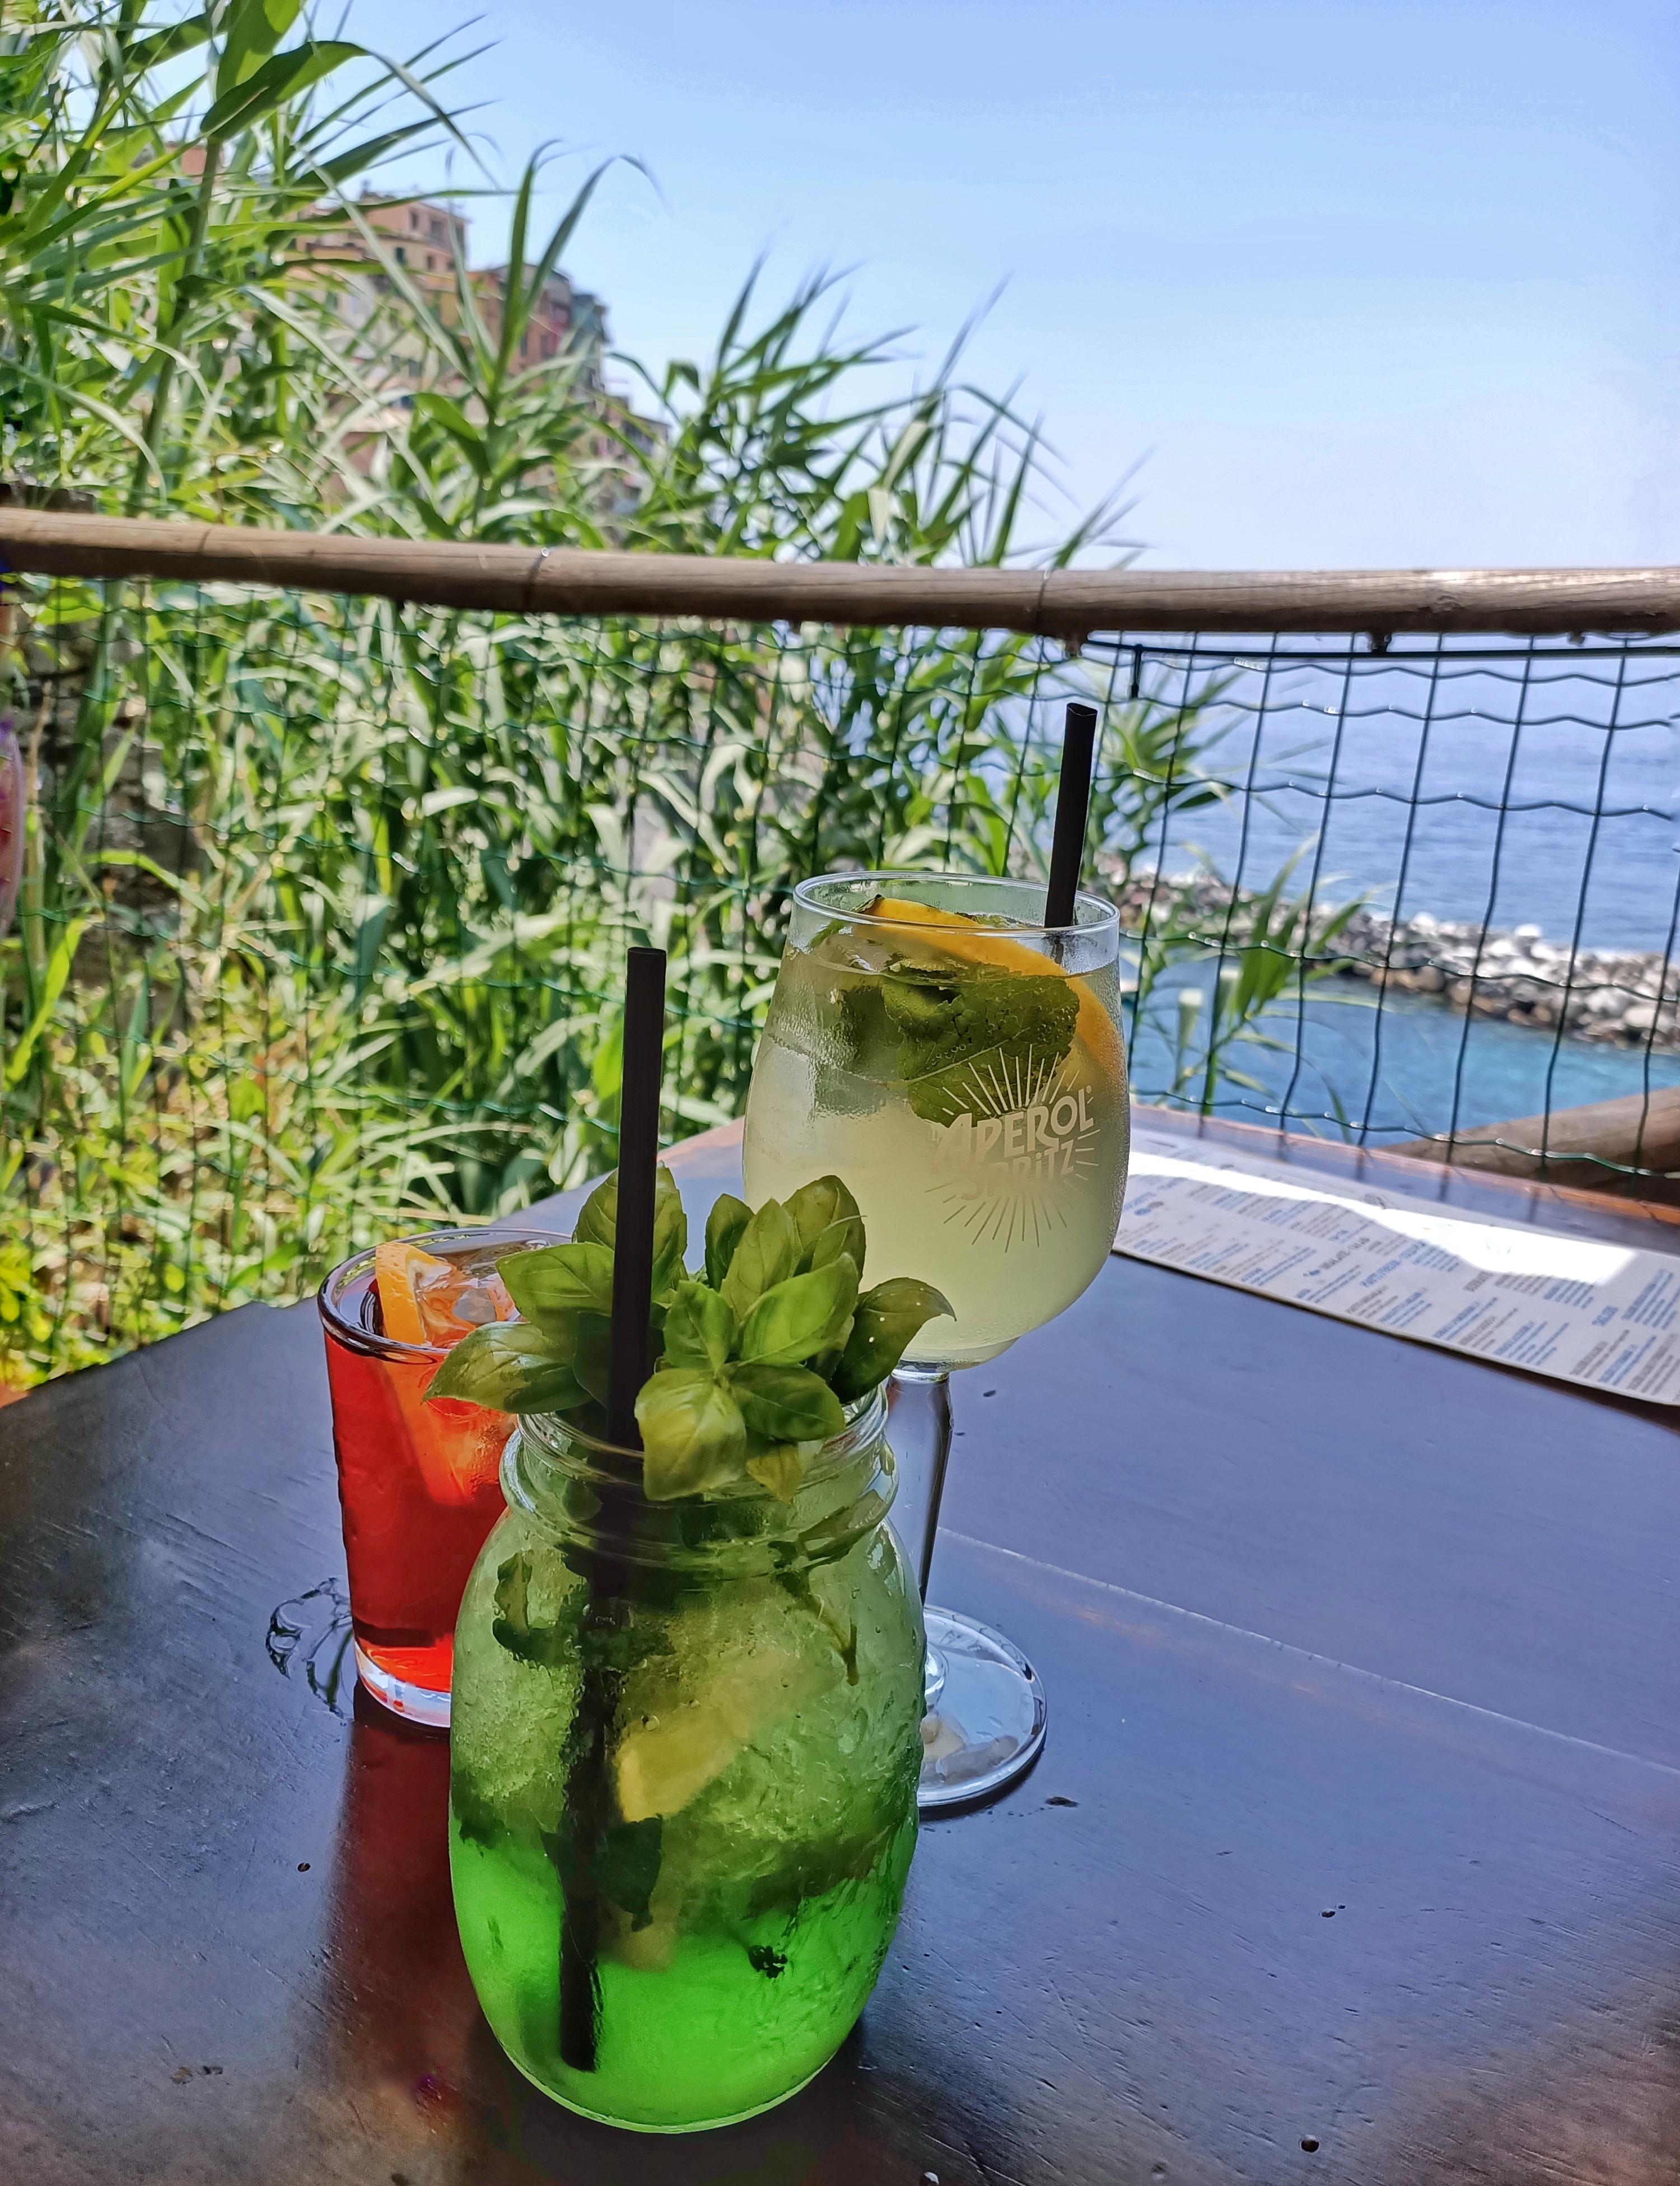 Three cocktails at the Nessun Dorma bar in Manarola, Italy. Their famous cocktail is the Basilito, a basil and mint cocktail. In the background, we can see the sea and the colourful houses of Manarola.